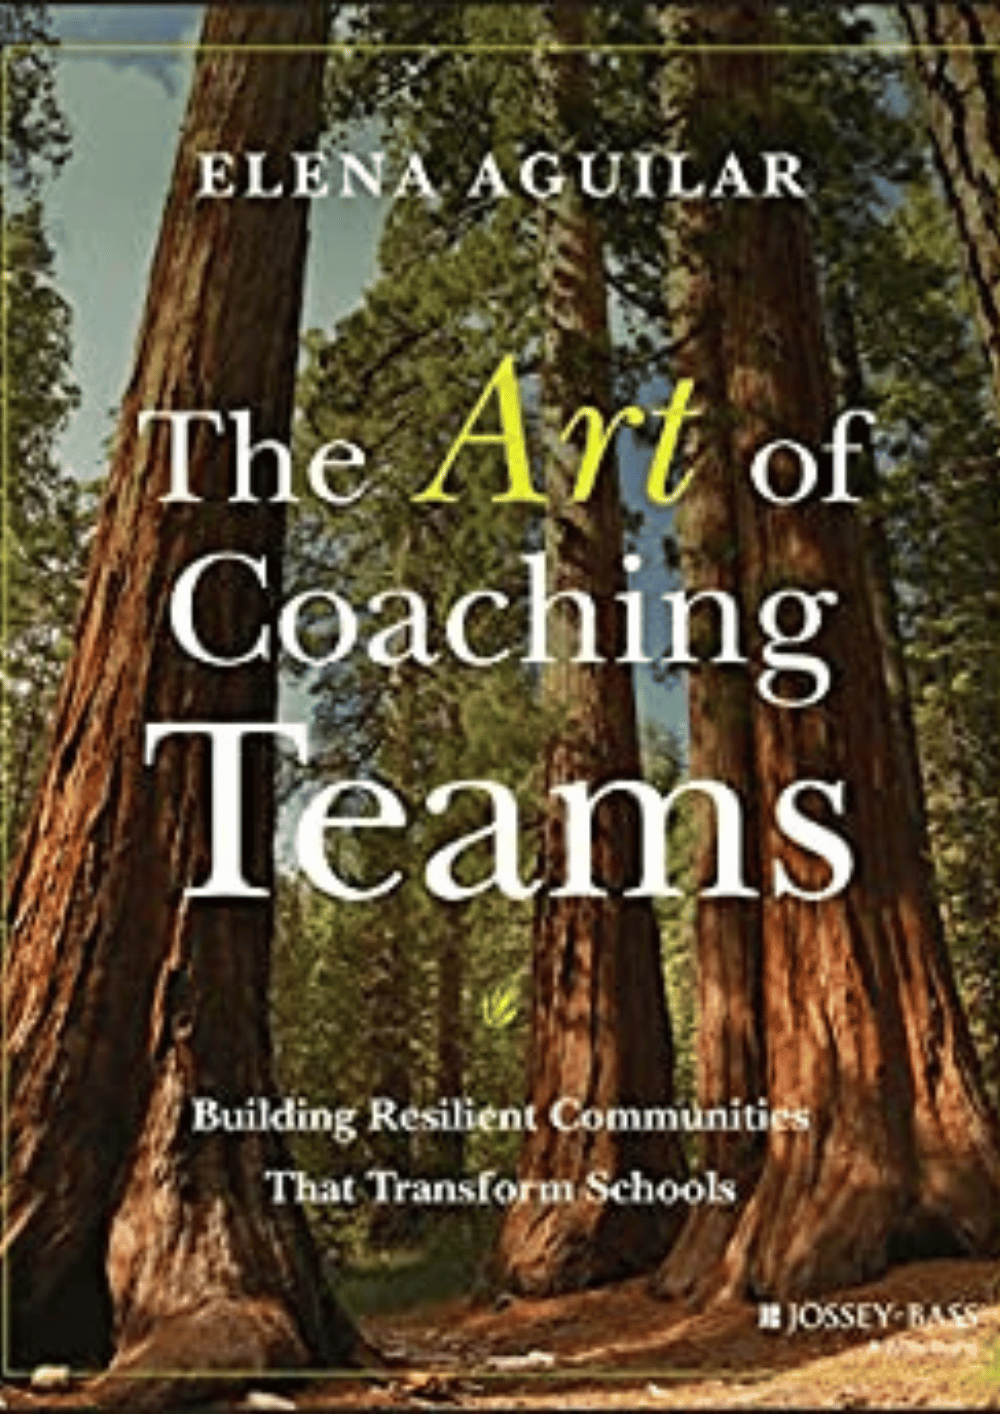 The Art of Coaching Teams: Building Resilient Communities that Transform Schools by Elena Aguilar